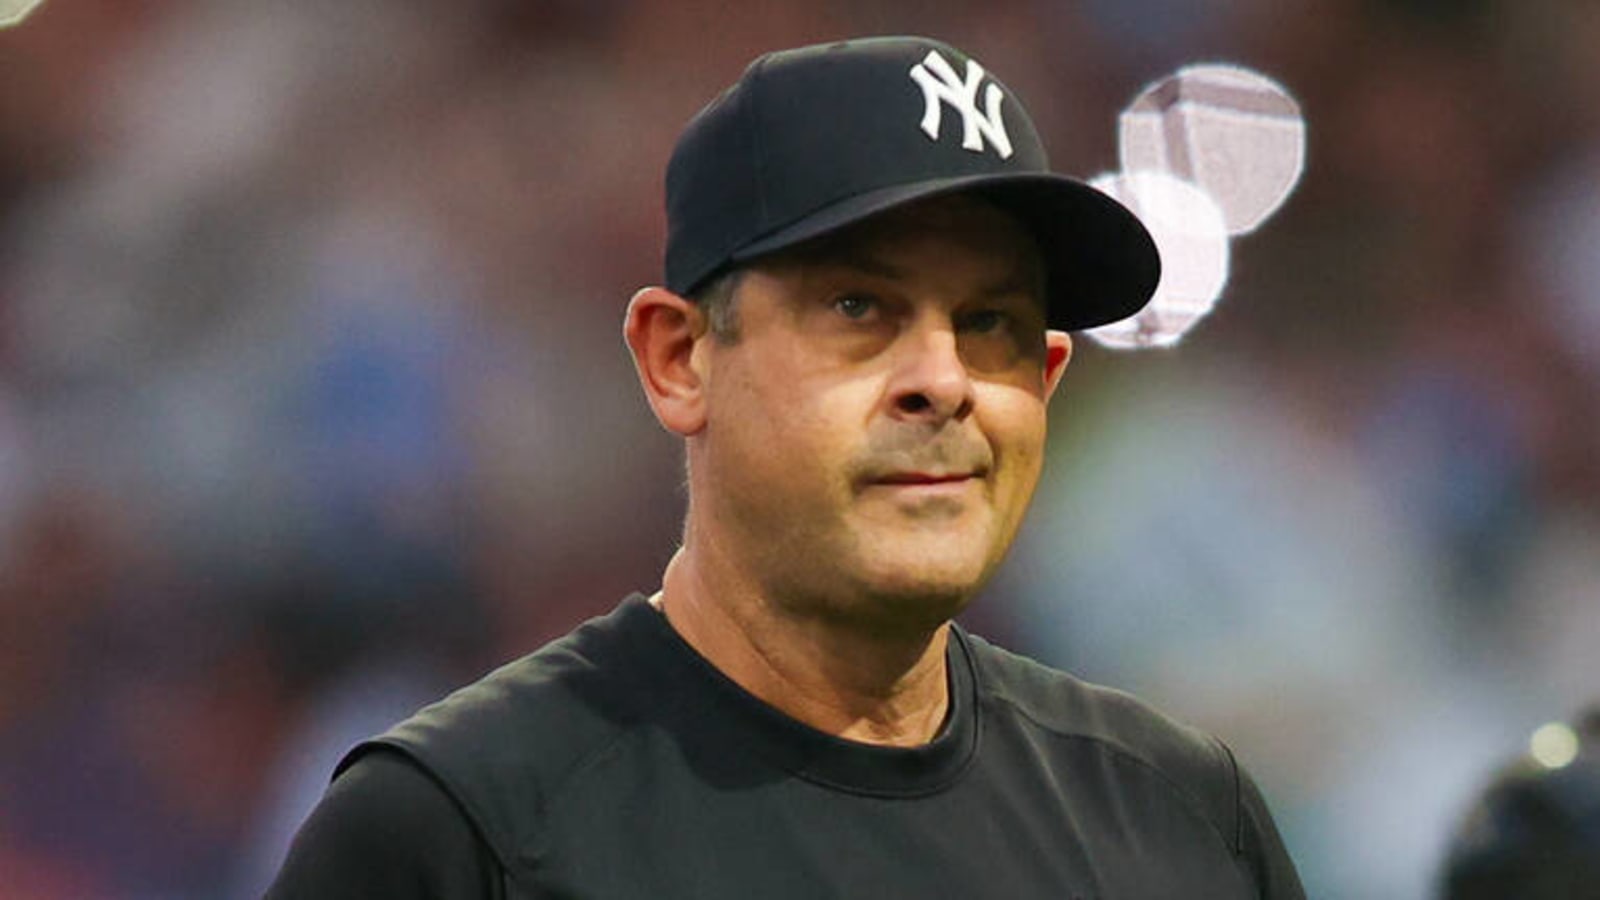 Sibling Stands Up For Aaron Boone, Blasts Lackluster Yankees